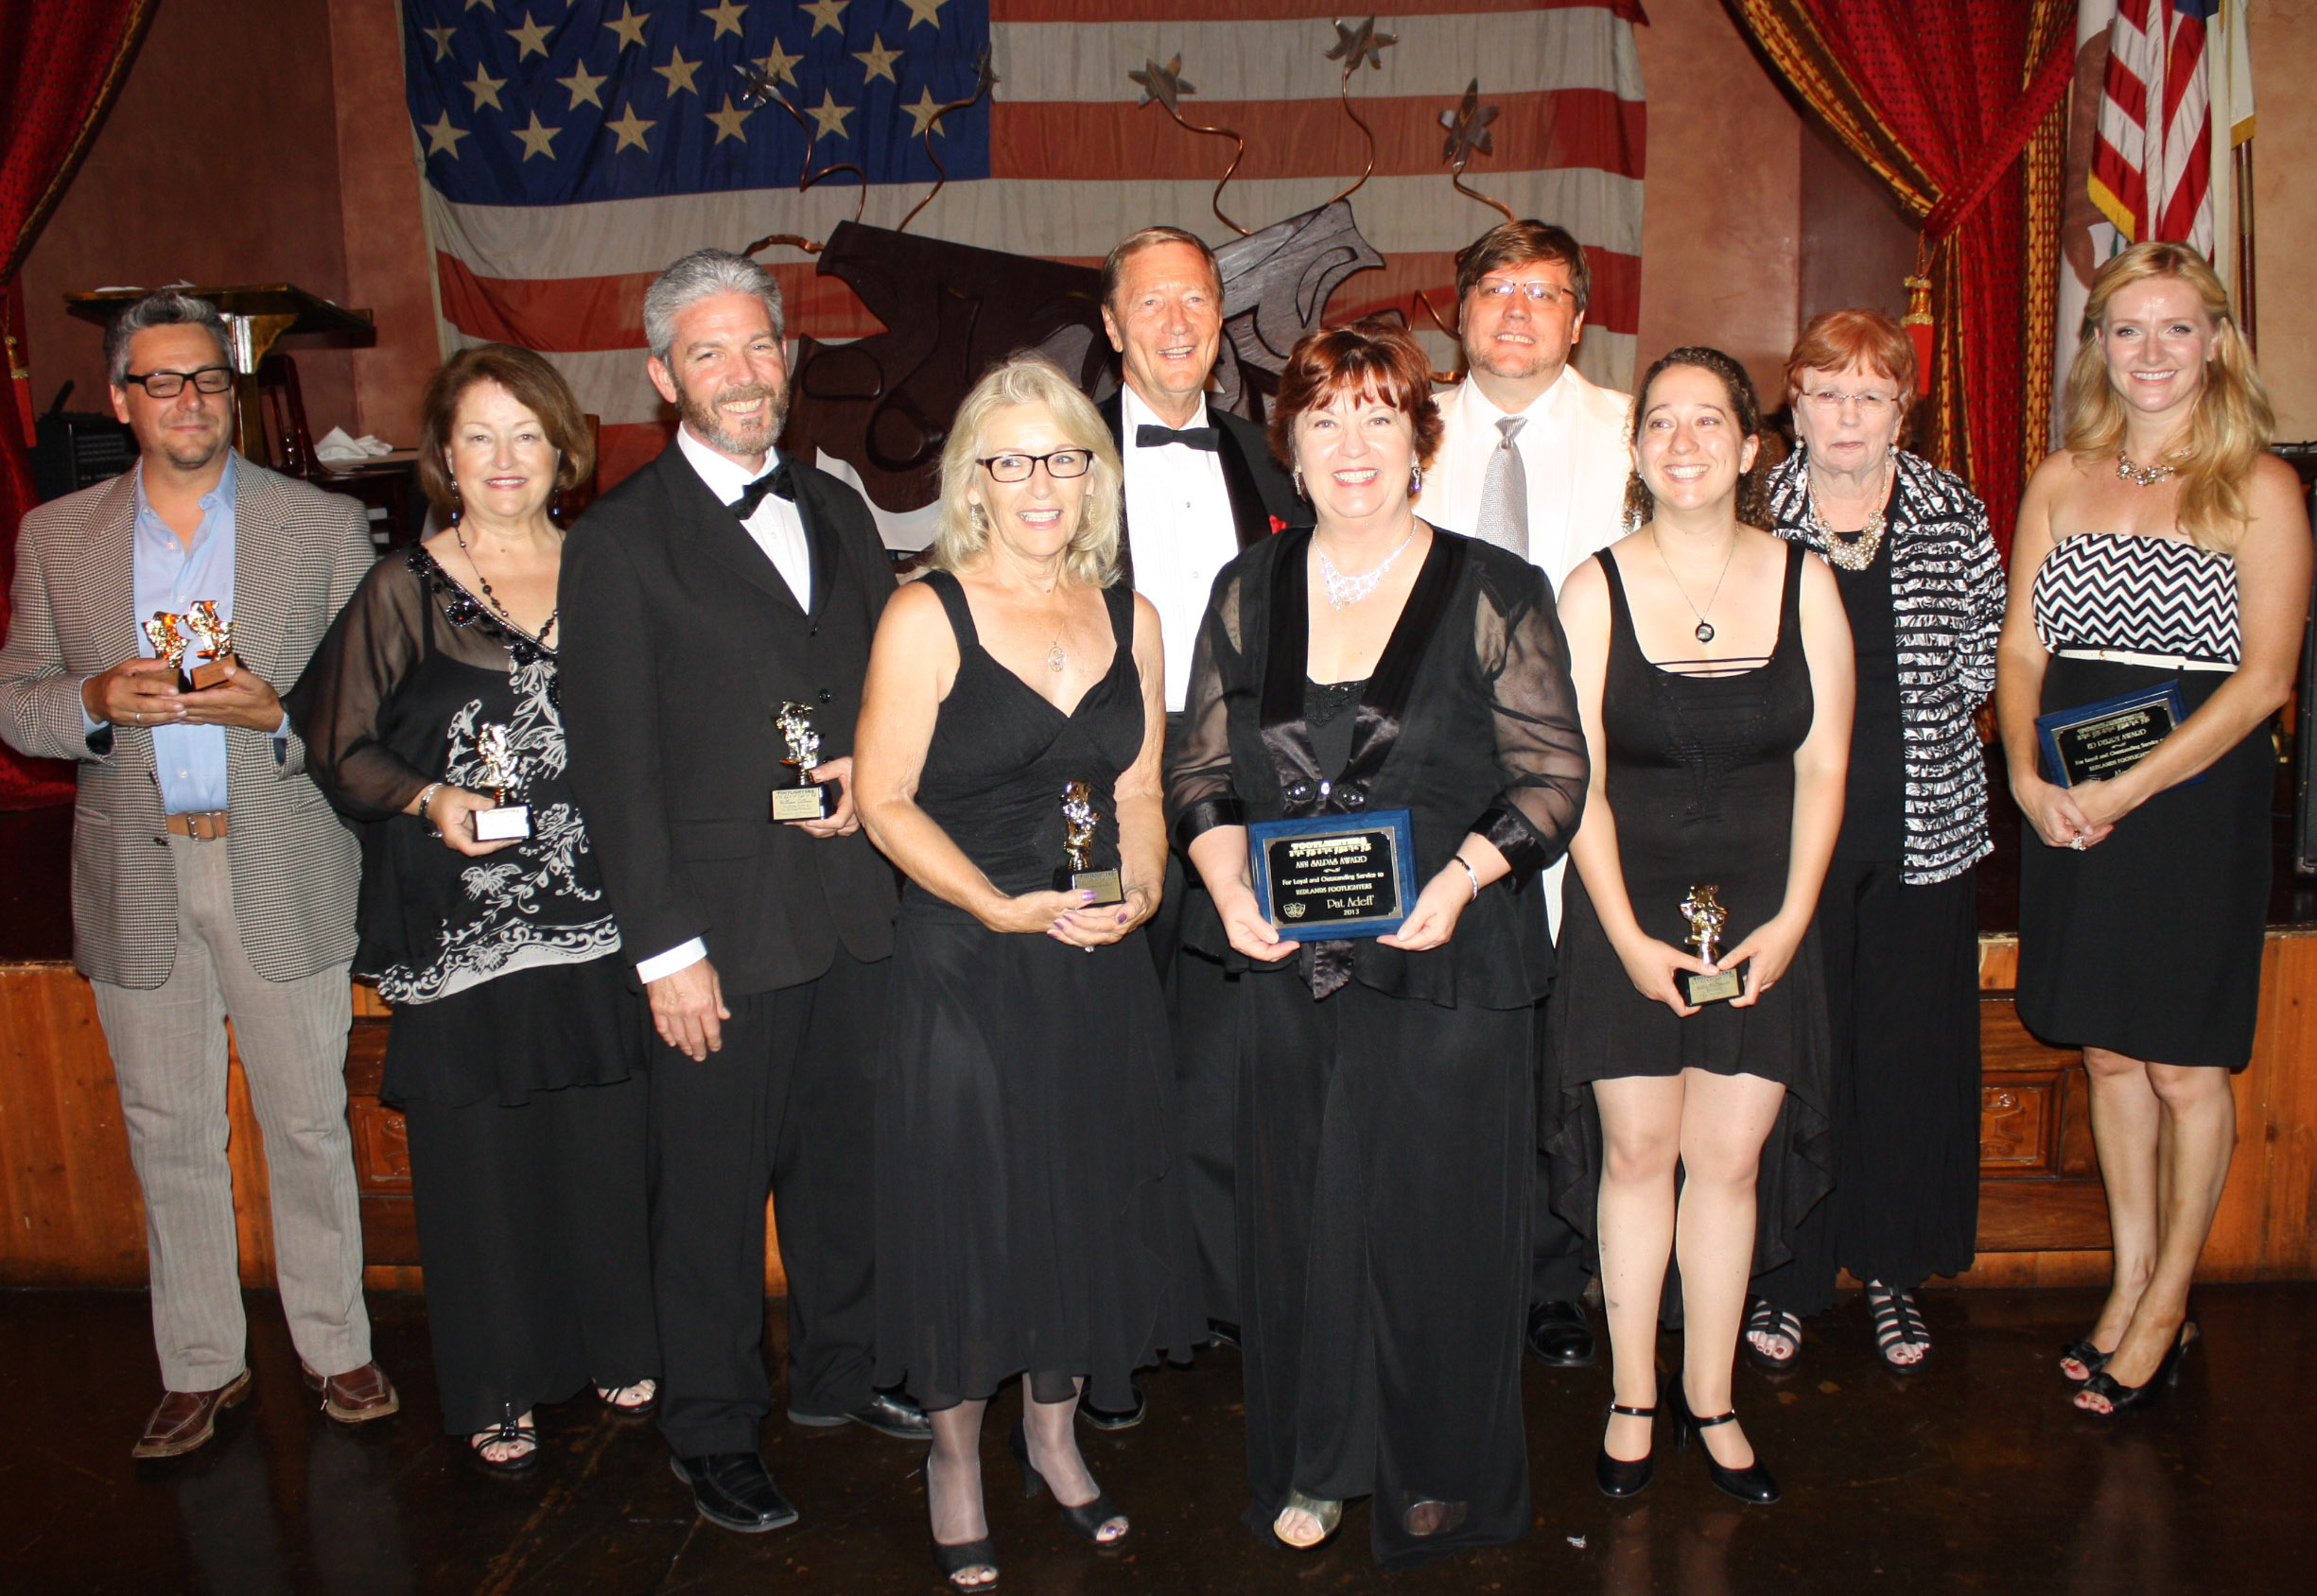 Winners at the Footlighters banquet on June 30th.  From left to right: Phillip Gabriel. Mary Carruthers, William Gillean, Pamela Lambert, Eric Gruenler, Pat Adeff, Tom Hurst, Kellie McDonald, Carol Steele, and Ali Rafter.